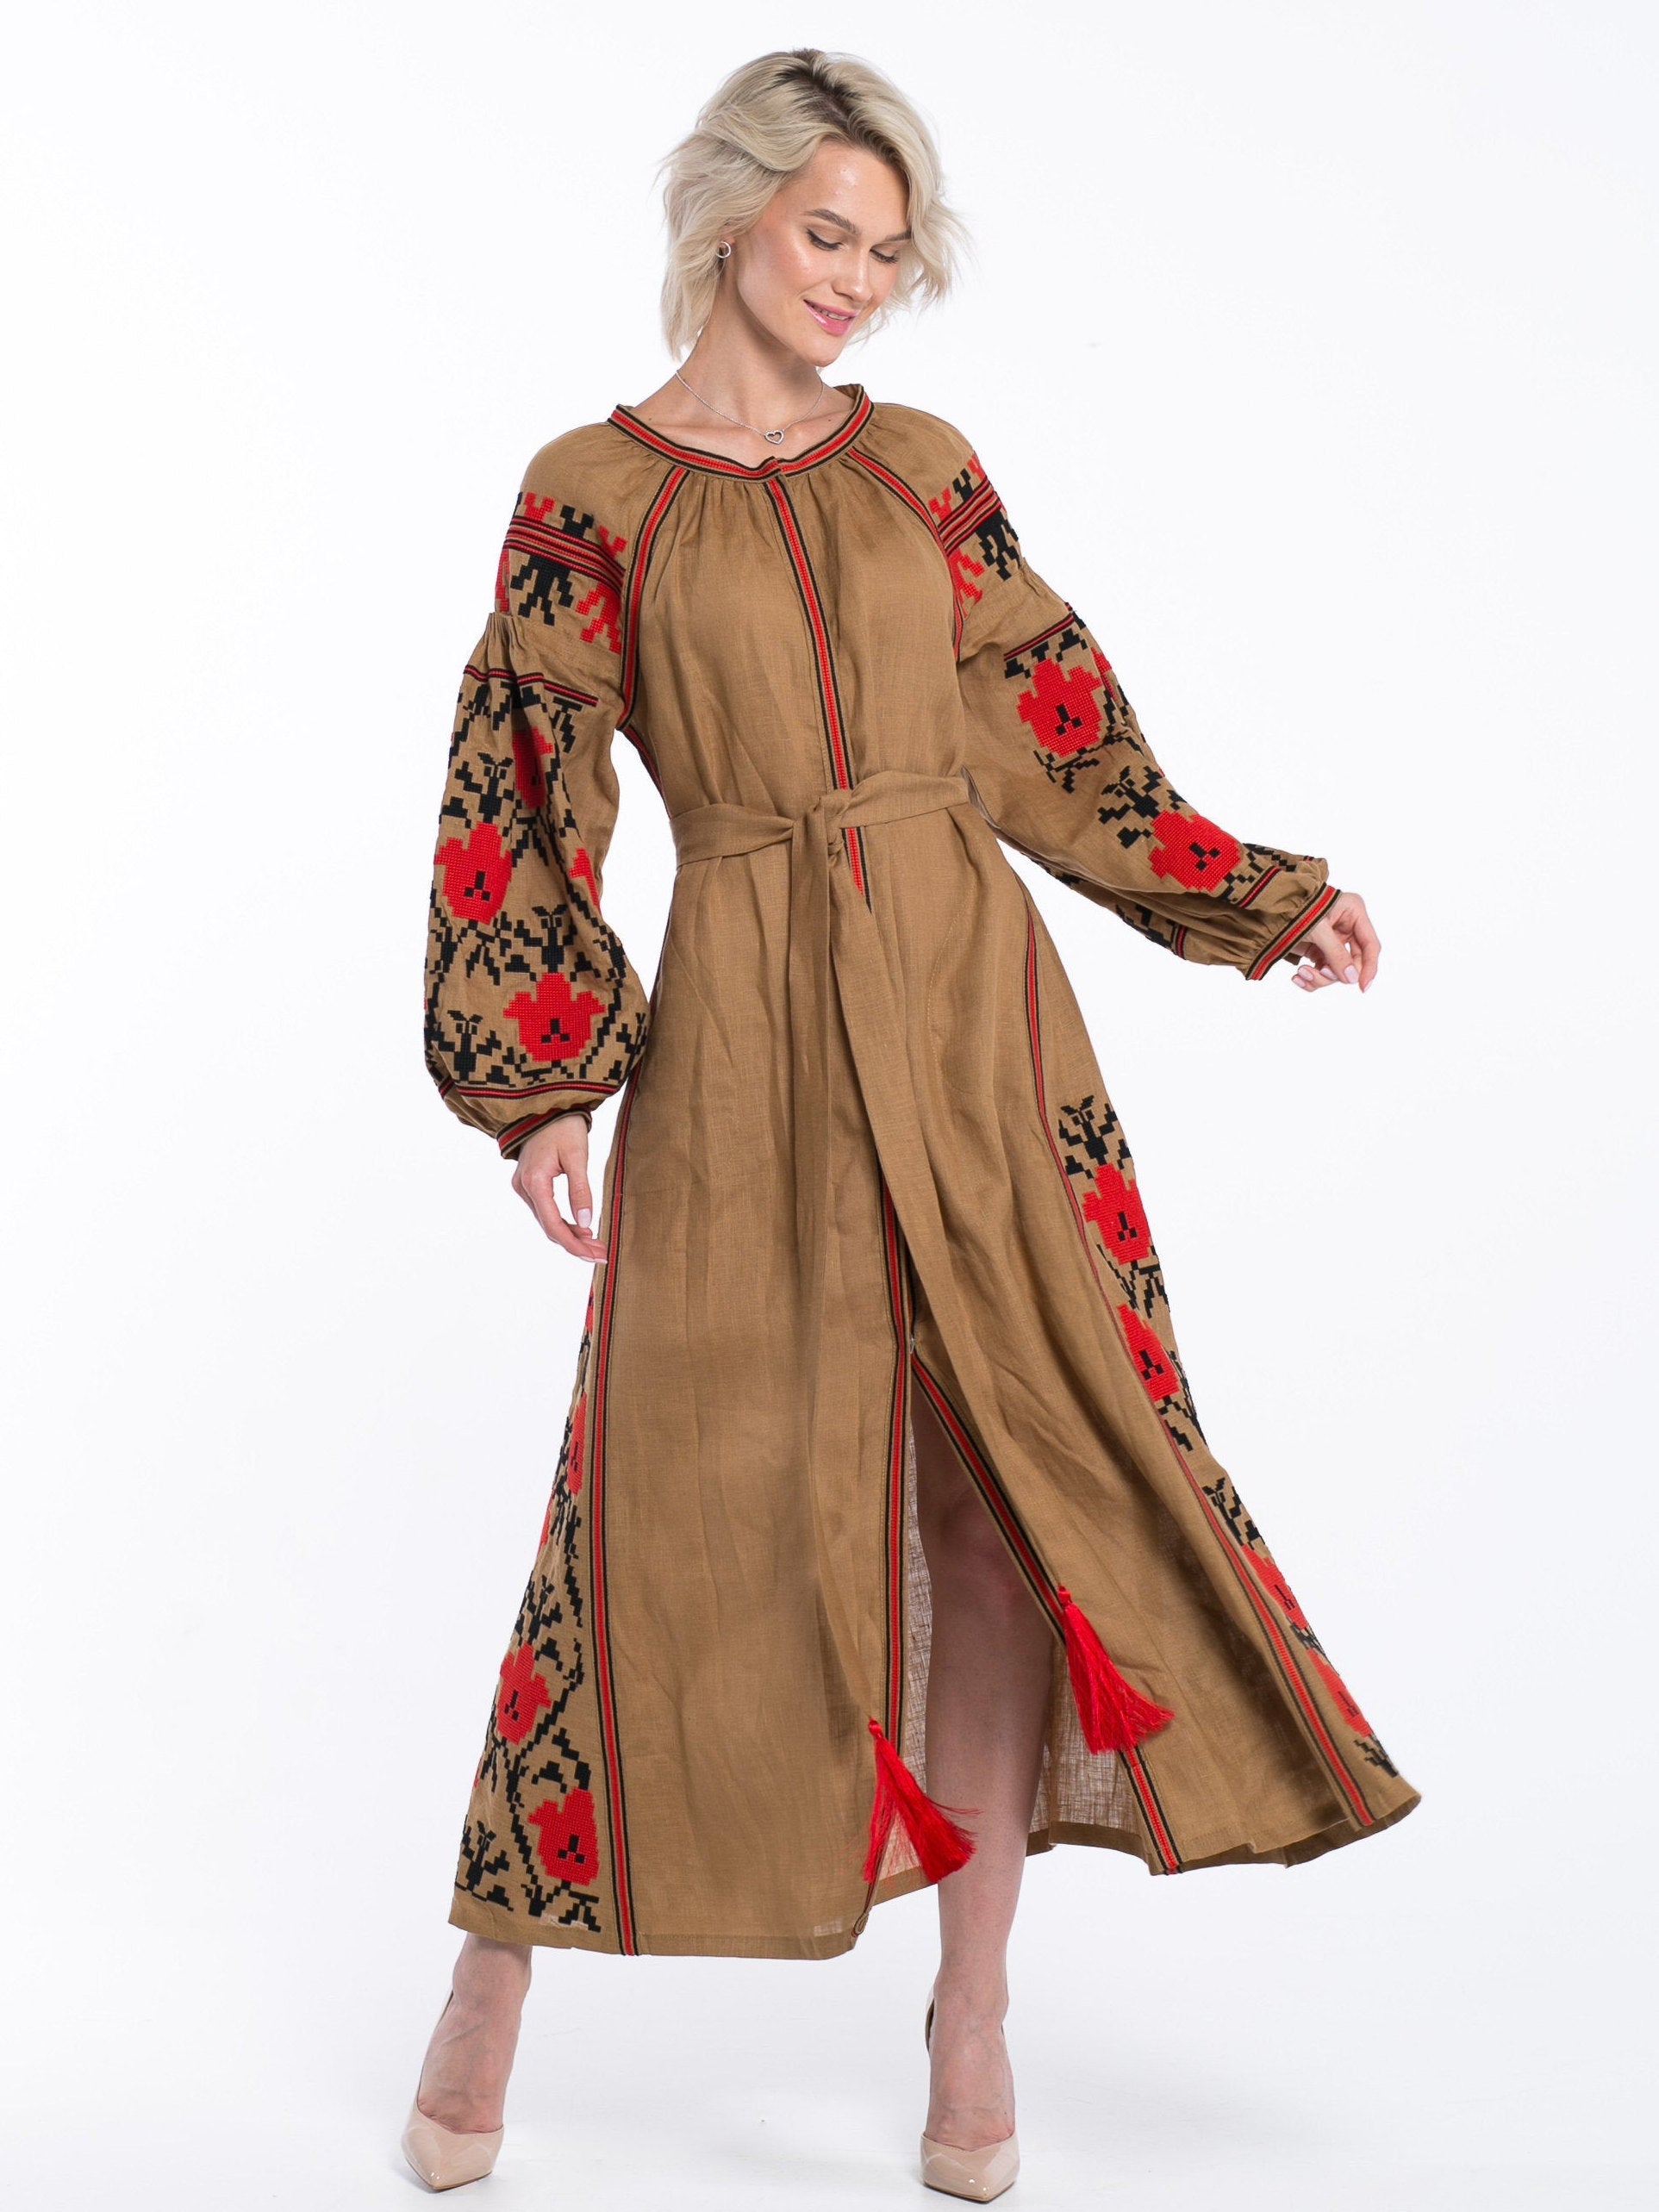 Fantastic boho dress with floral embroidery